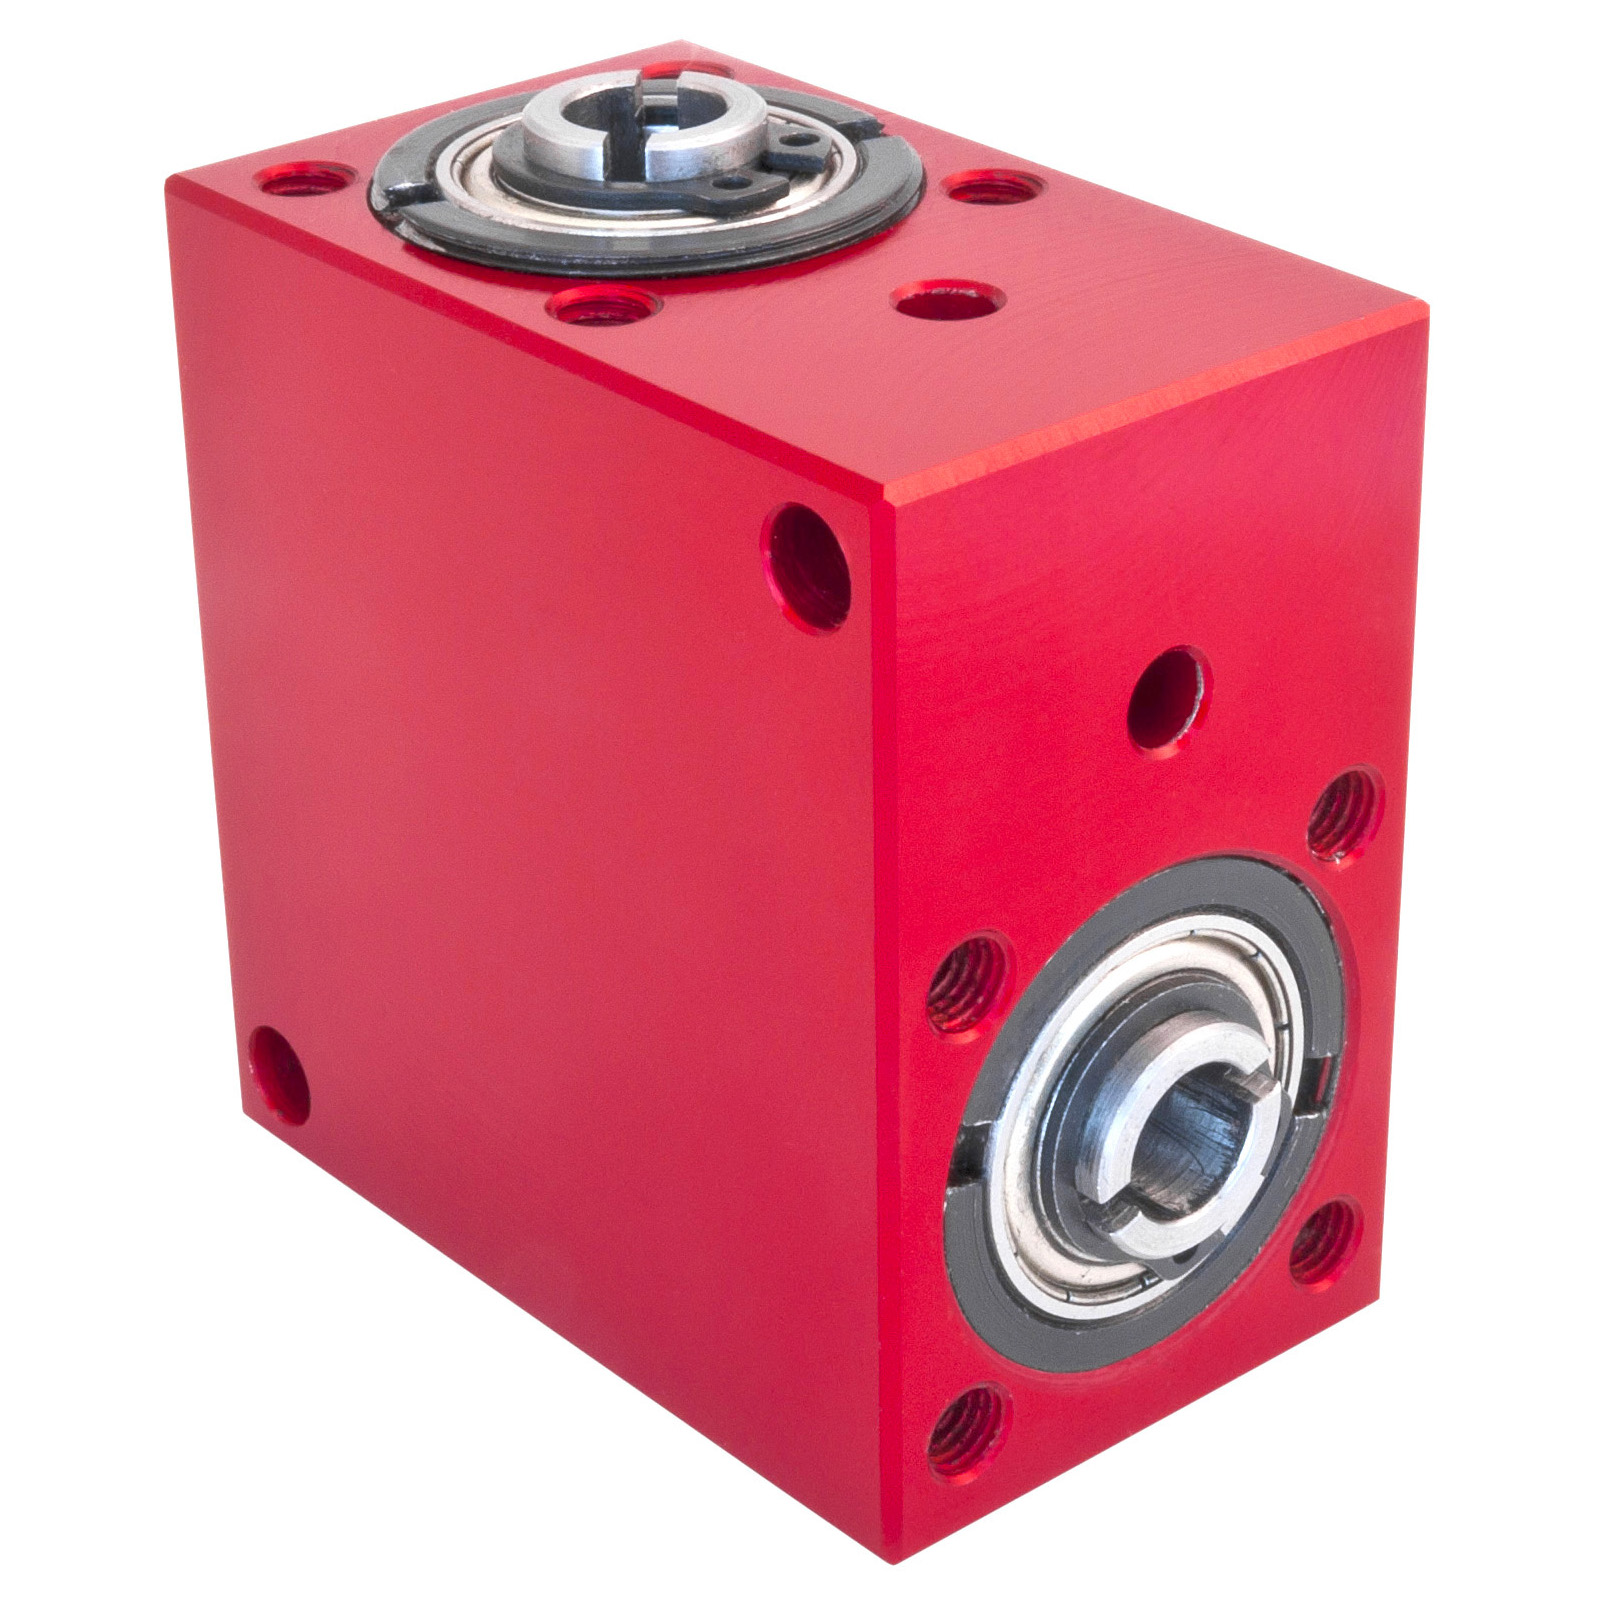 Right angled gearbox, bored shafts - up to 4.4 Nm - bored shaft - 3000rpm